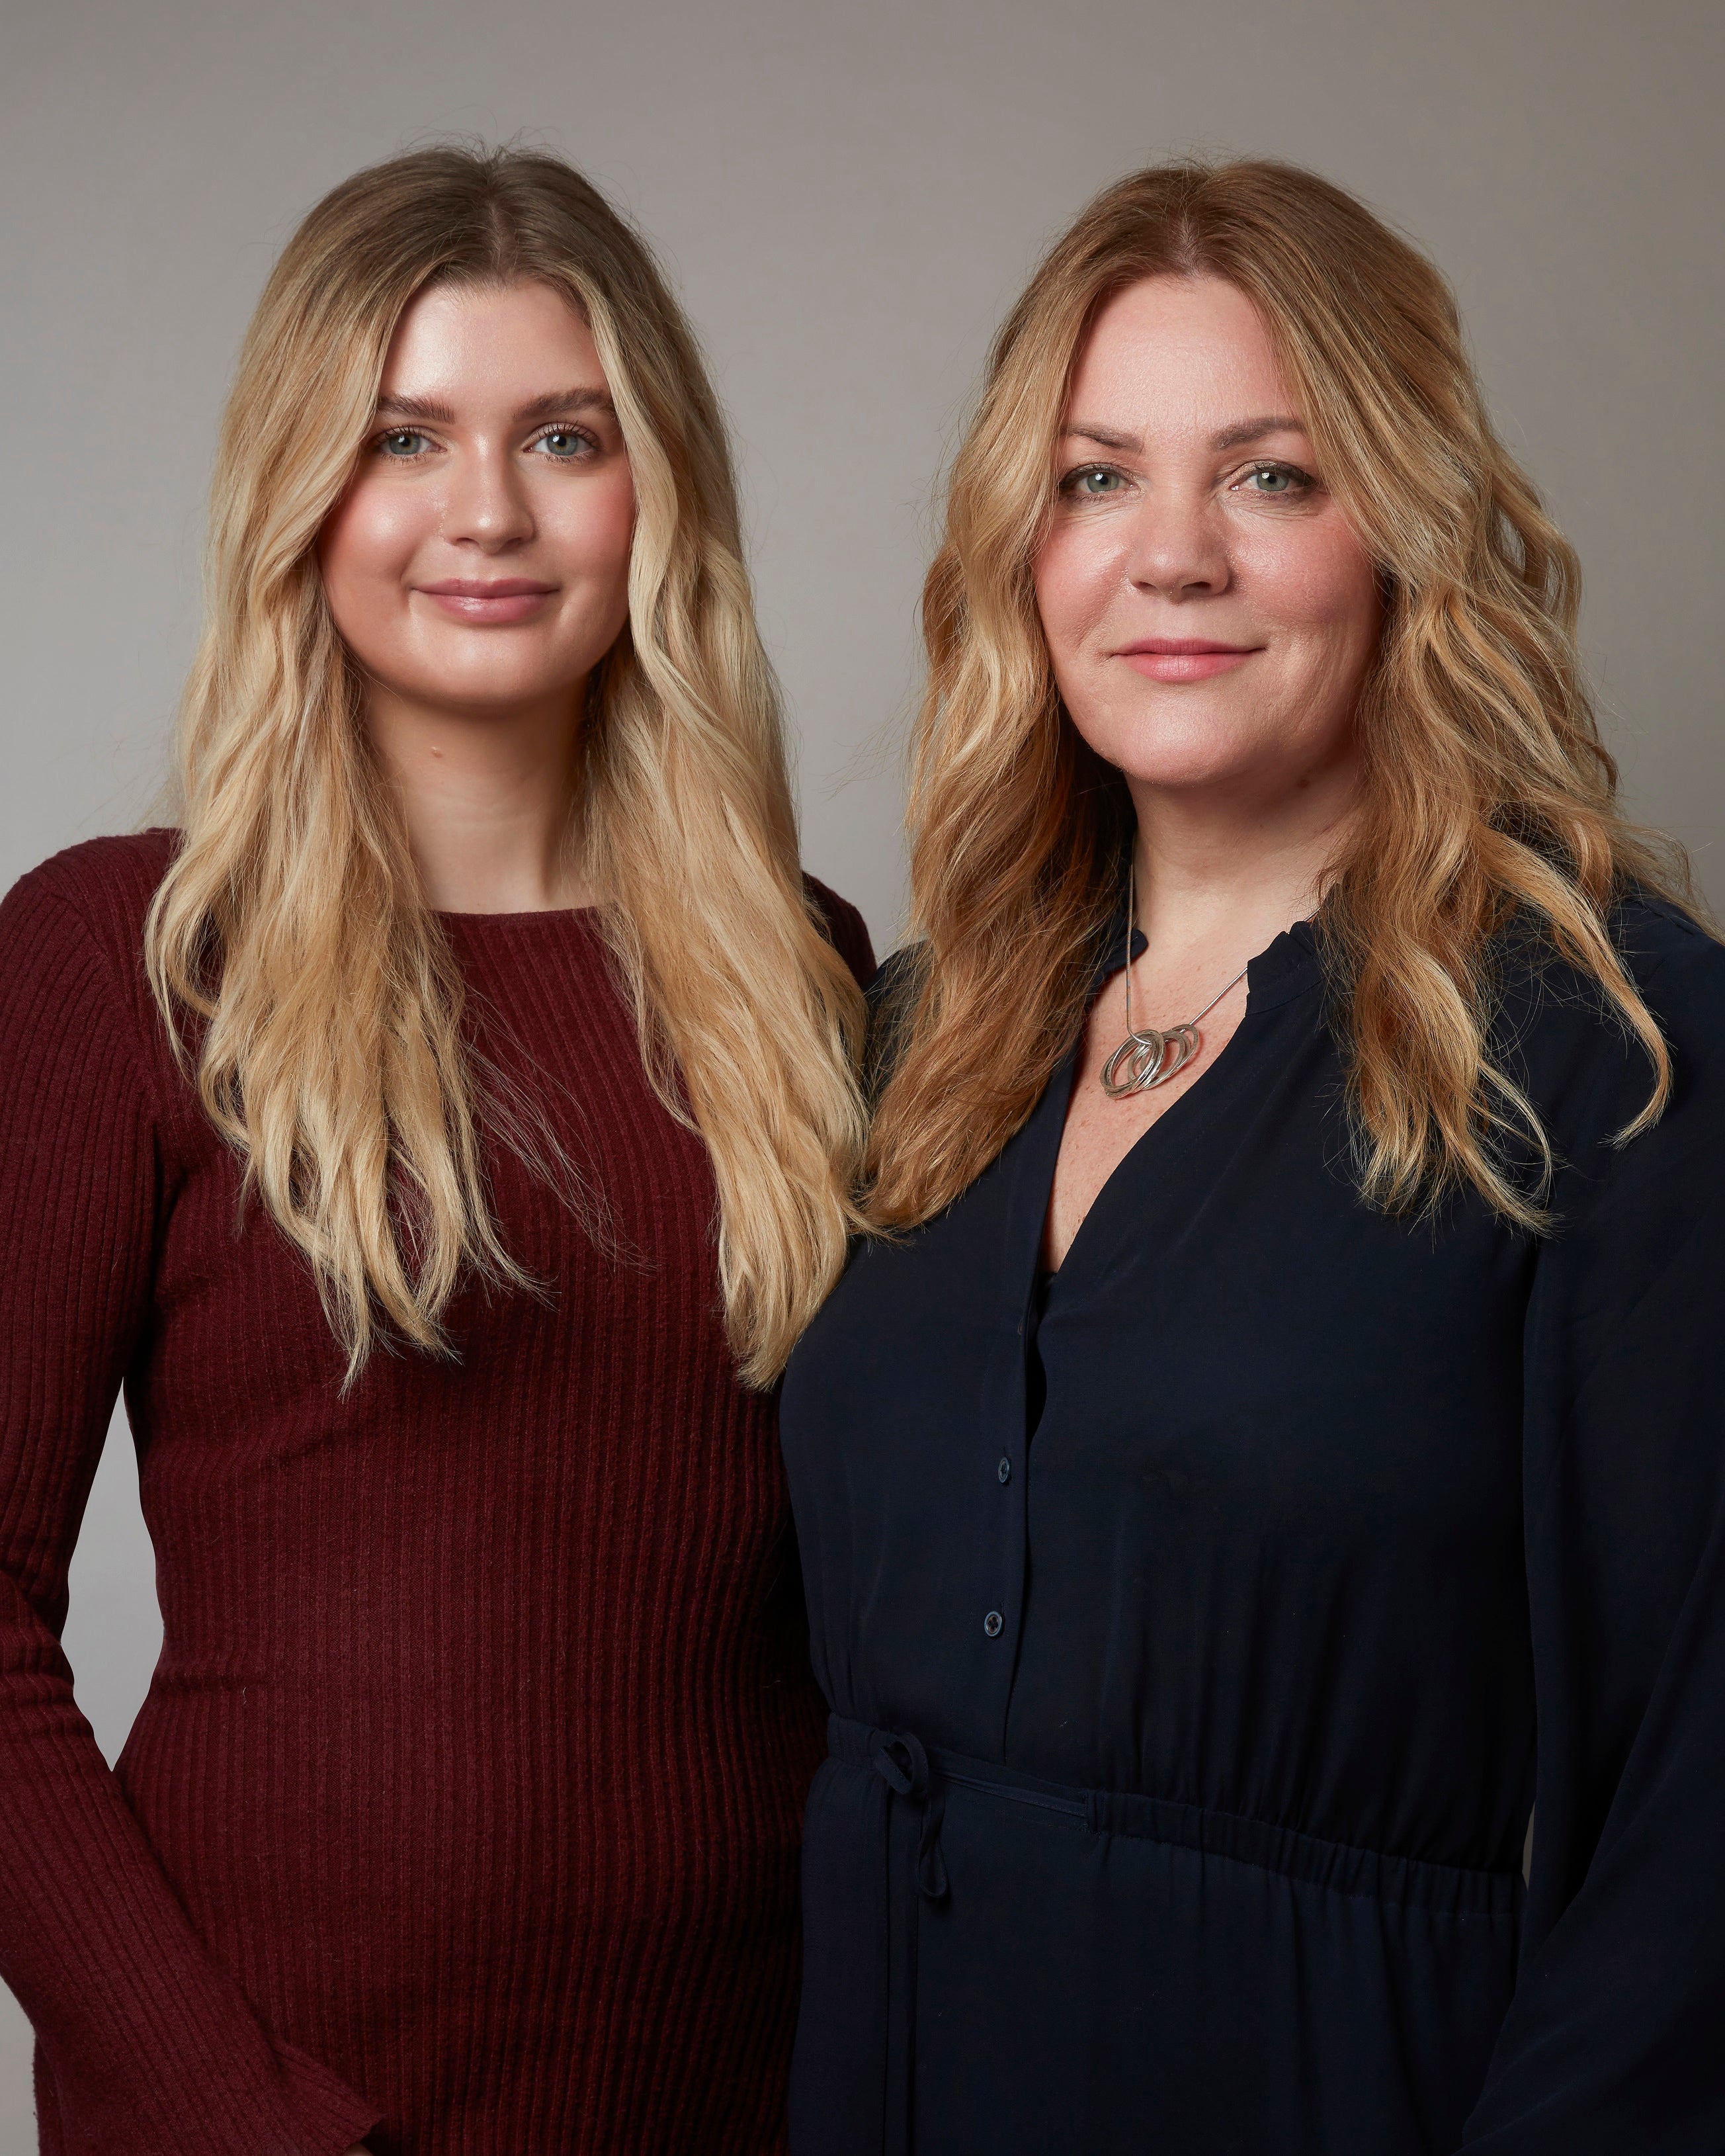 Image of the two female founders of Moo and Yoo, Suzie and Olivia.